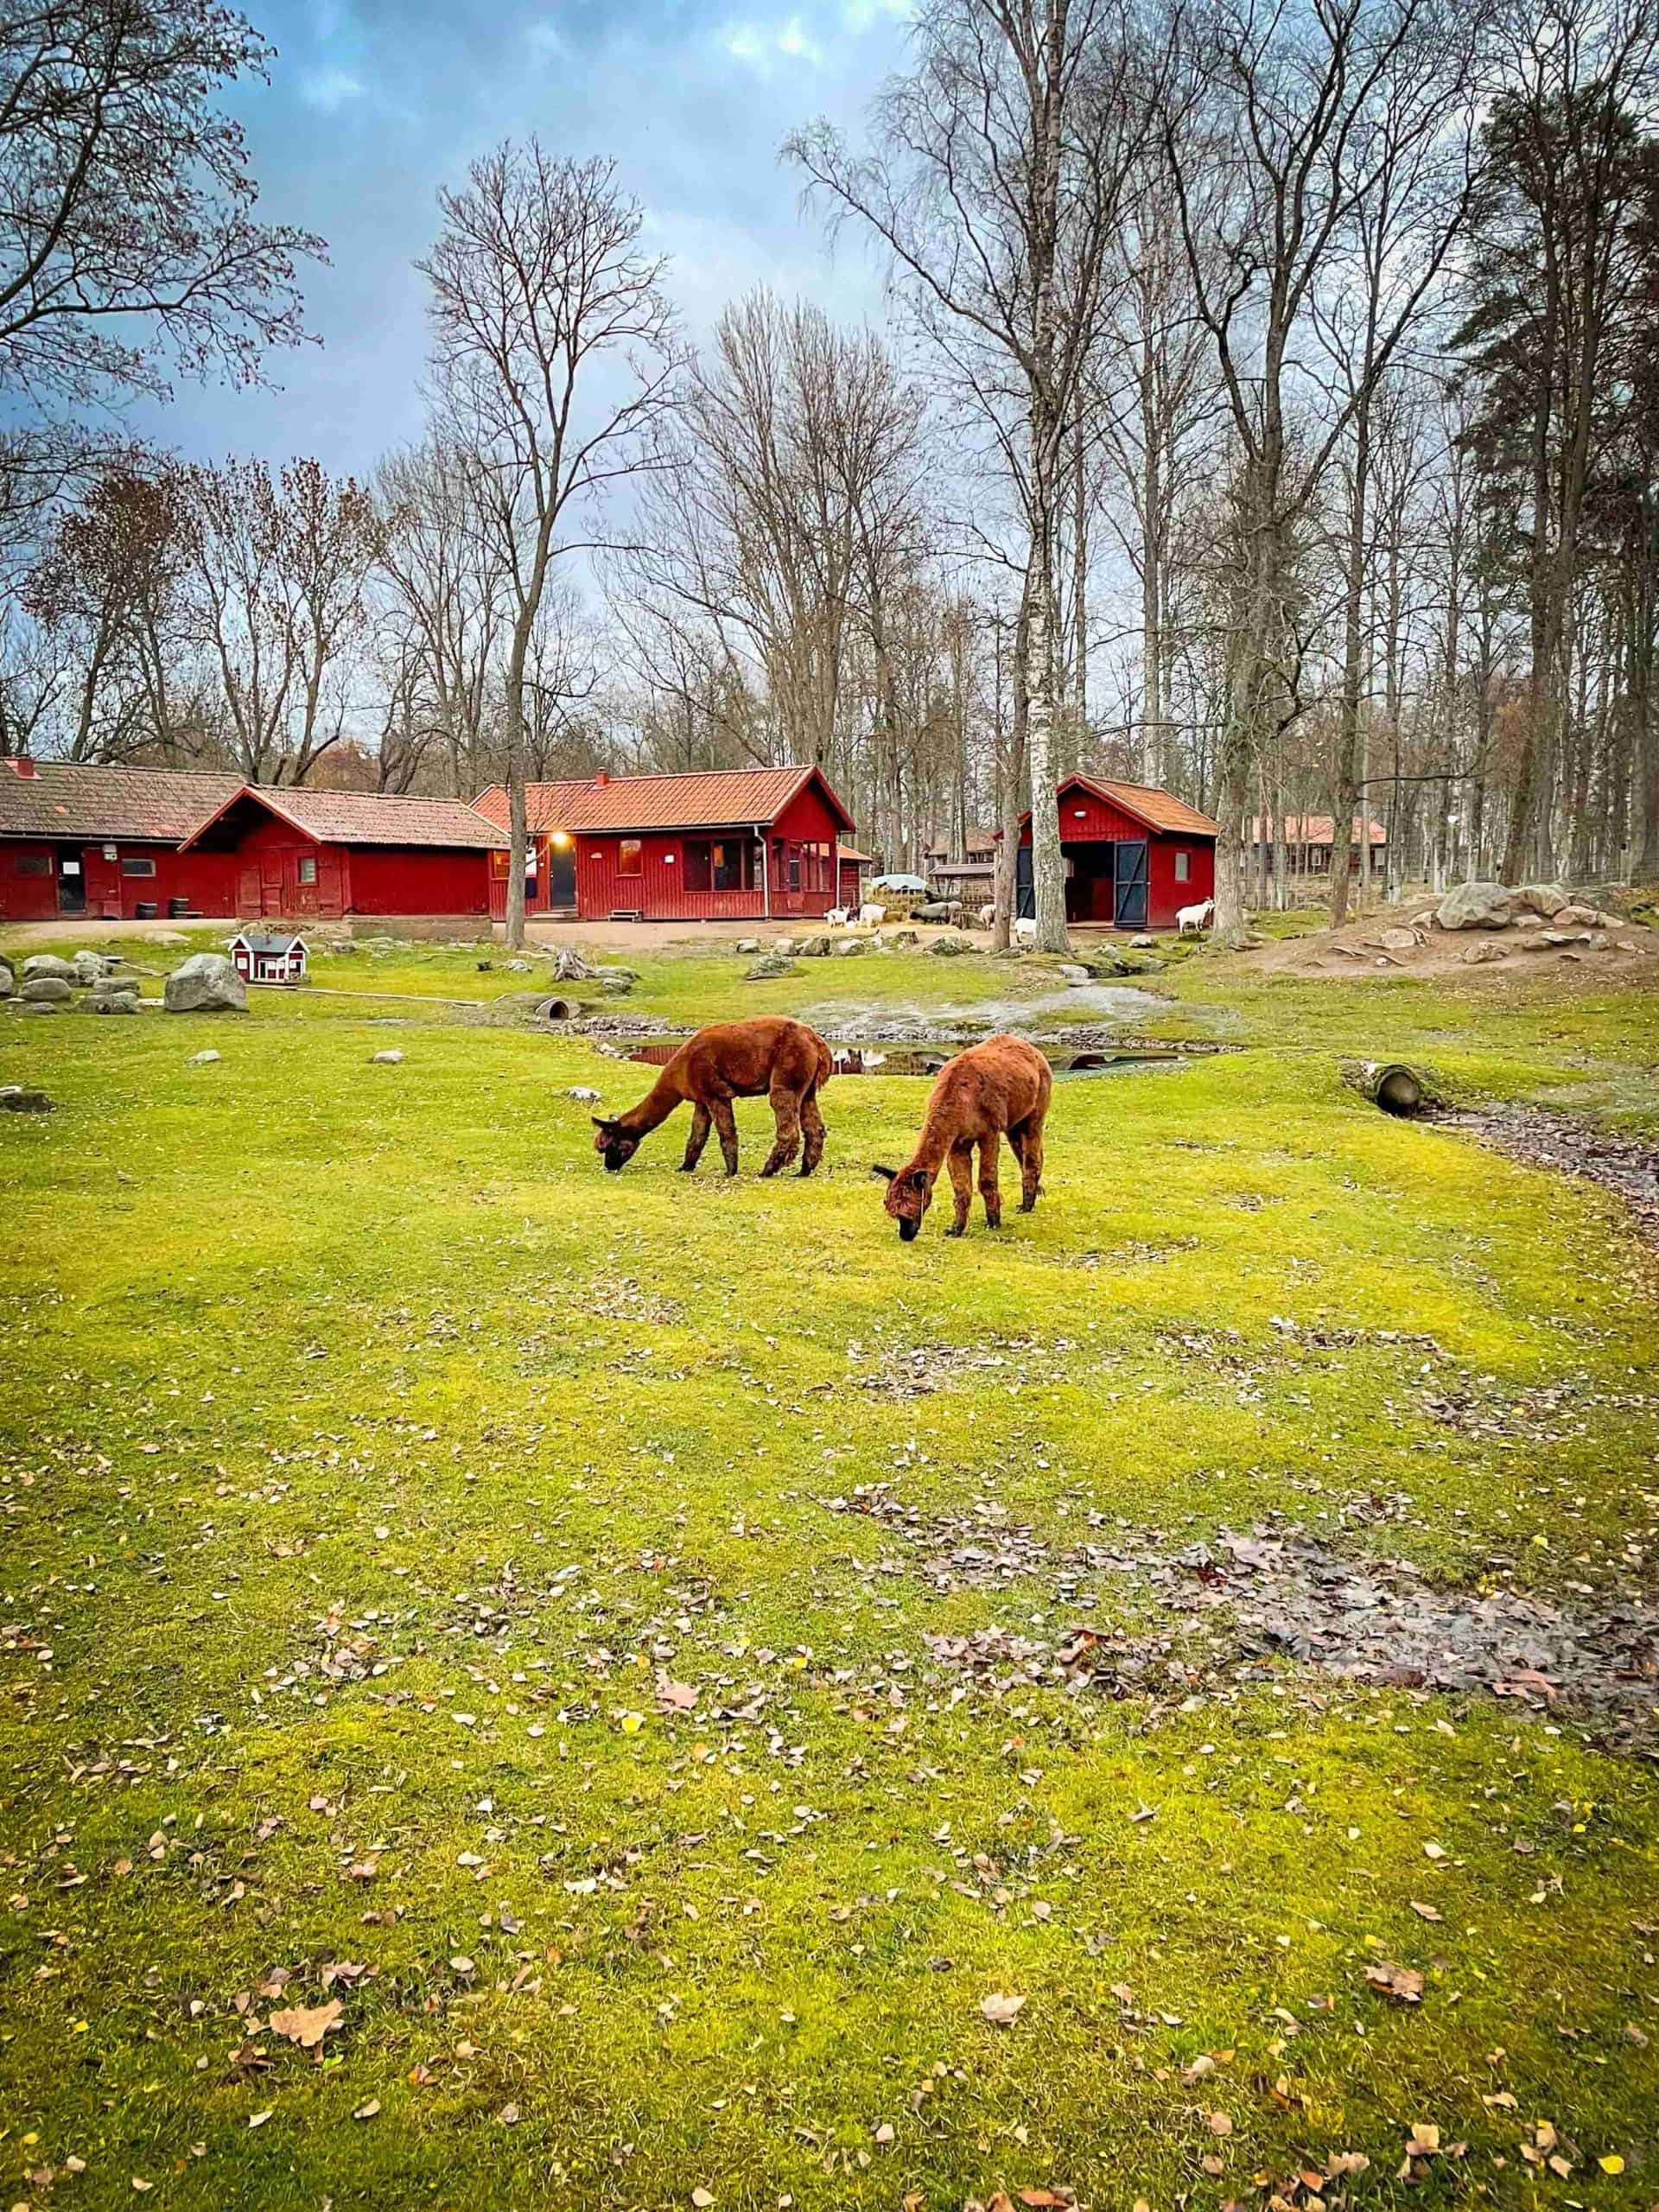 2 brown alpacas eating grass in the foreground. In the background are red Swedish cottages. Photo taken at Höbro Bruk in Sandviken, Sweden | Destination Unknown